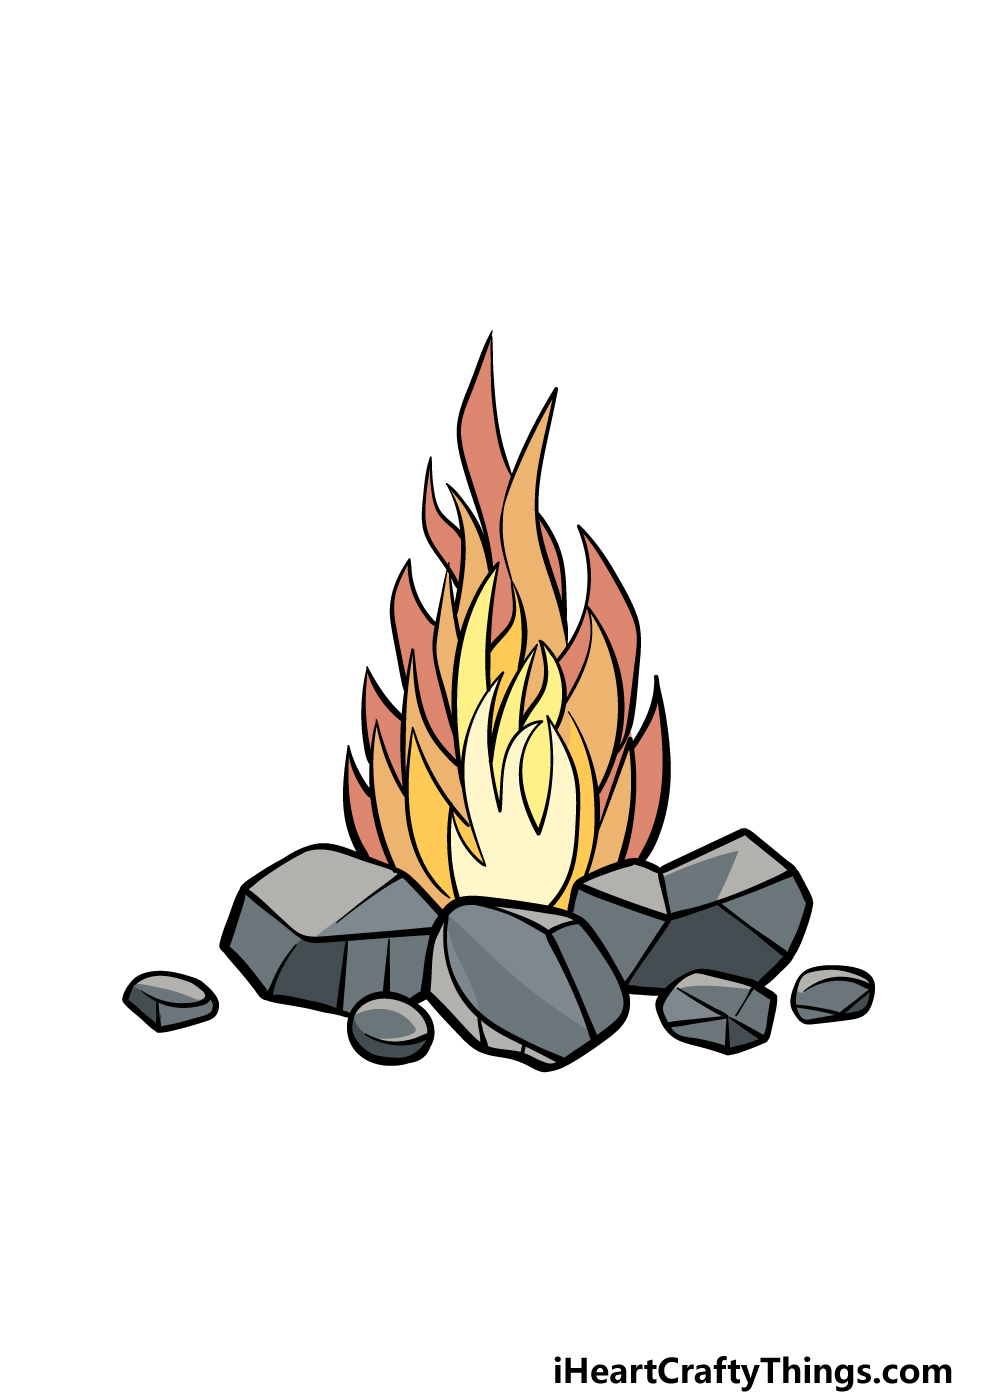 Cartoon Fire Drawing - How To Draw A Cartoon Fire Step By Step